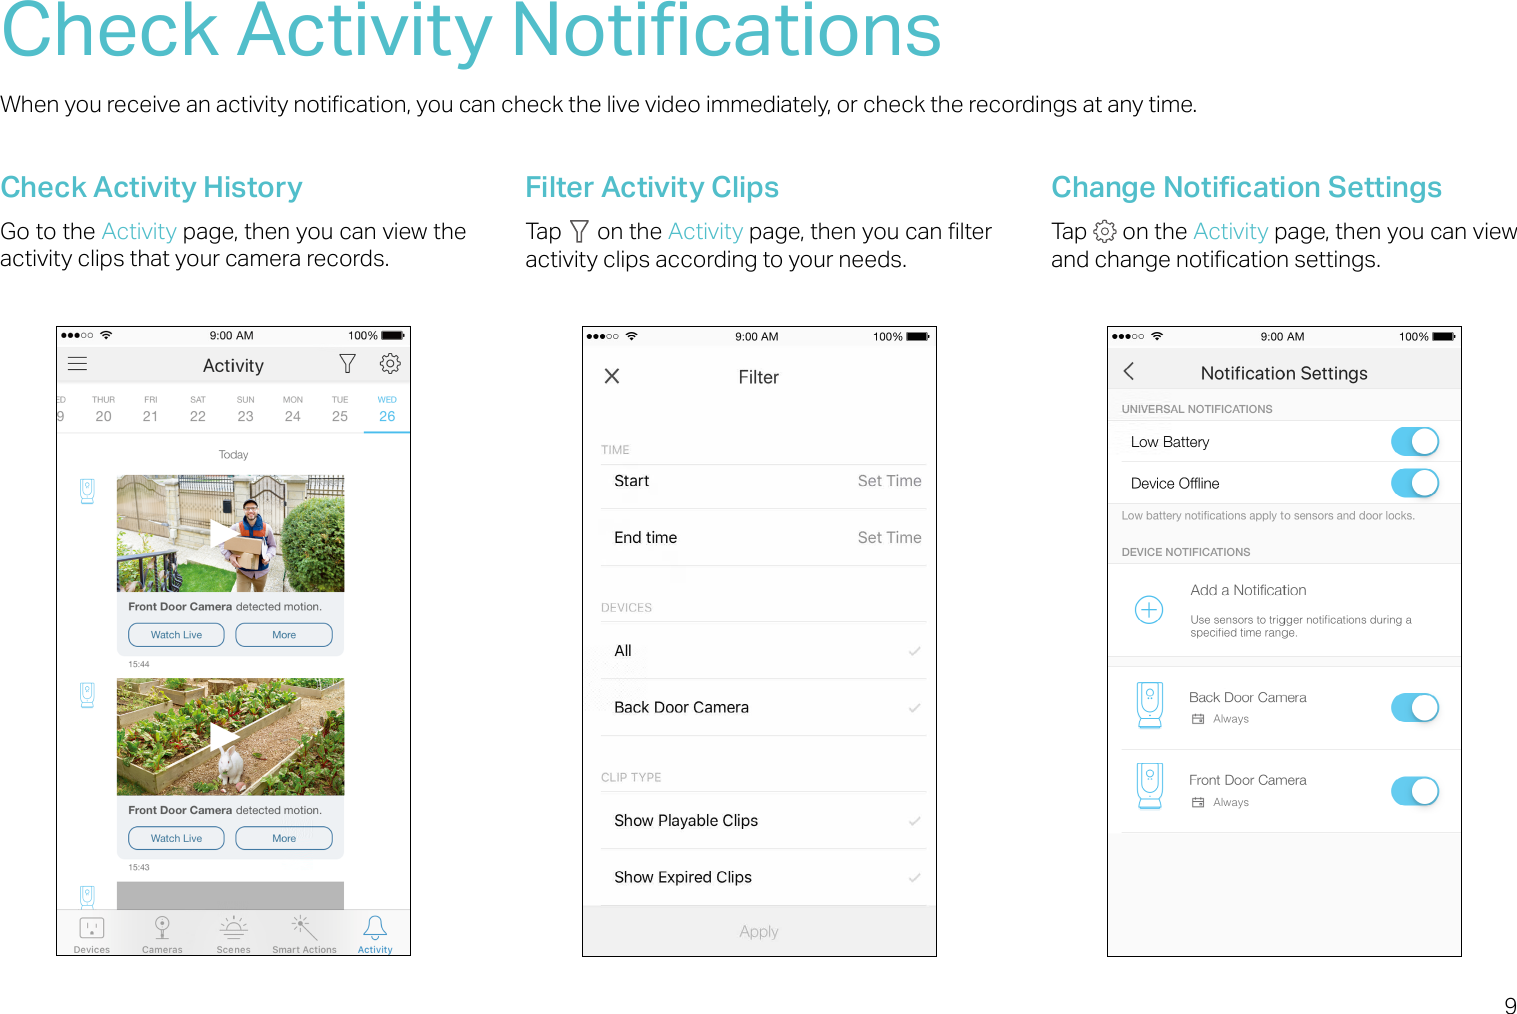 9Check Activity NoticationsWhen you receive an activity notication, you can check the live video immediately, or check the recordings at any time. Check Activity HistoryGo to the Activity page, then you can view the activity clips that your camera records.Filter Activity ClipsTap   on the Activity page, then you can lter activity clips according to your needs.Change Notication SettingsTap   on the Activity page, then you can view and change notication settings.